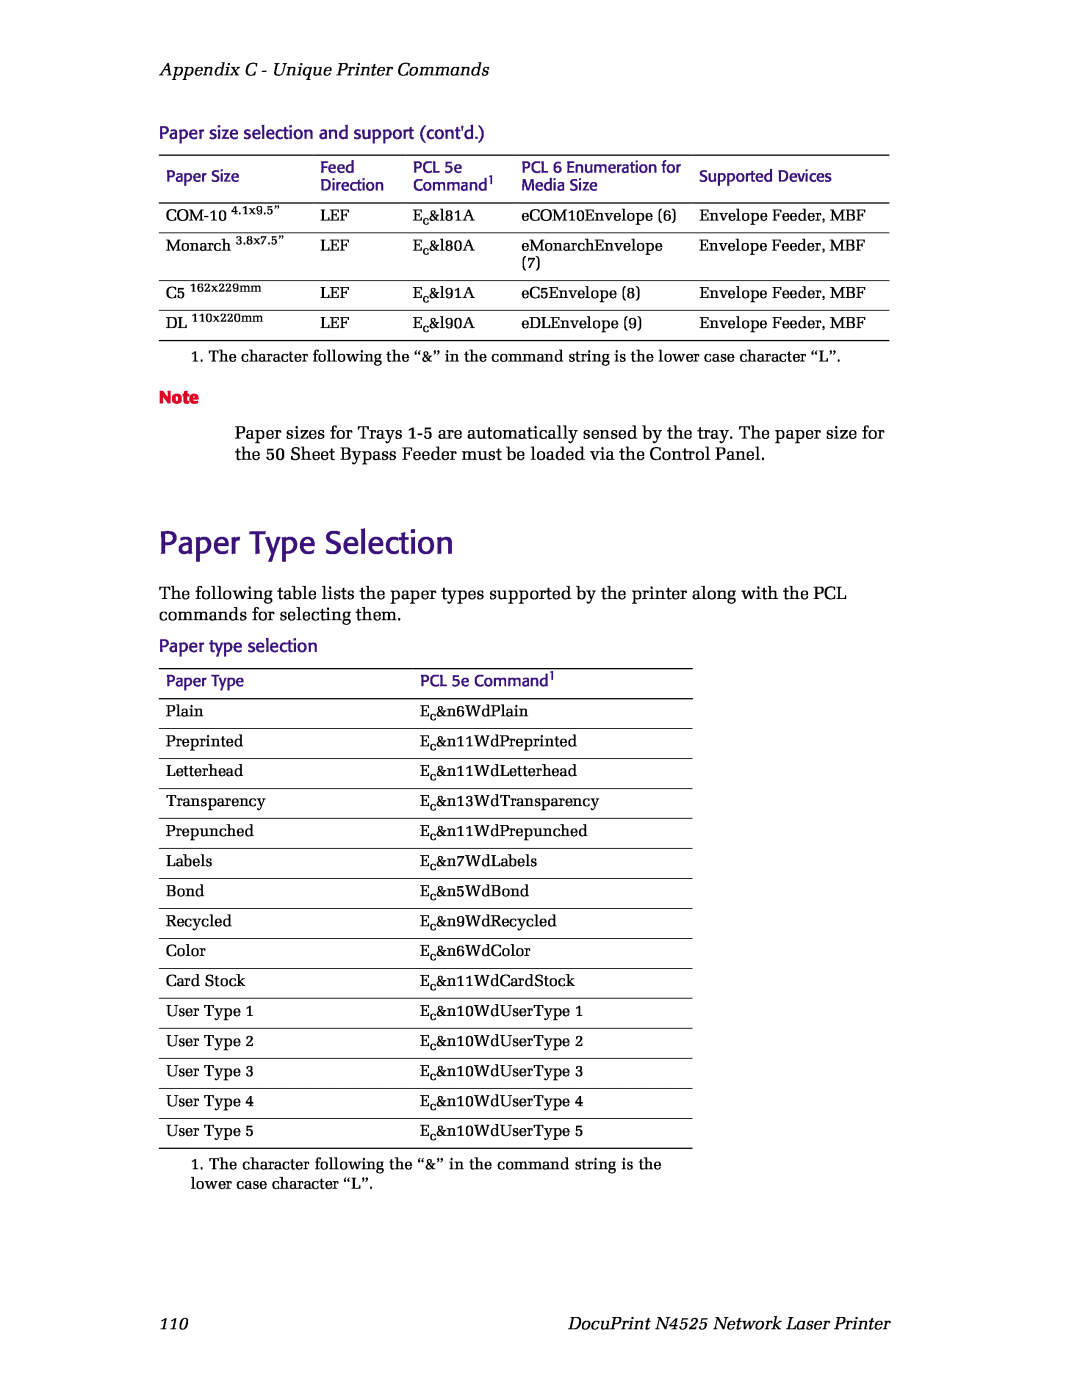 Xerox N4525 manual Paper Type Selection, Appendix C - Unique Printer Commands, Paper size selection and support contd 